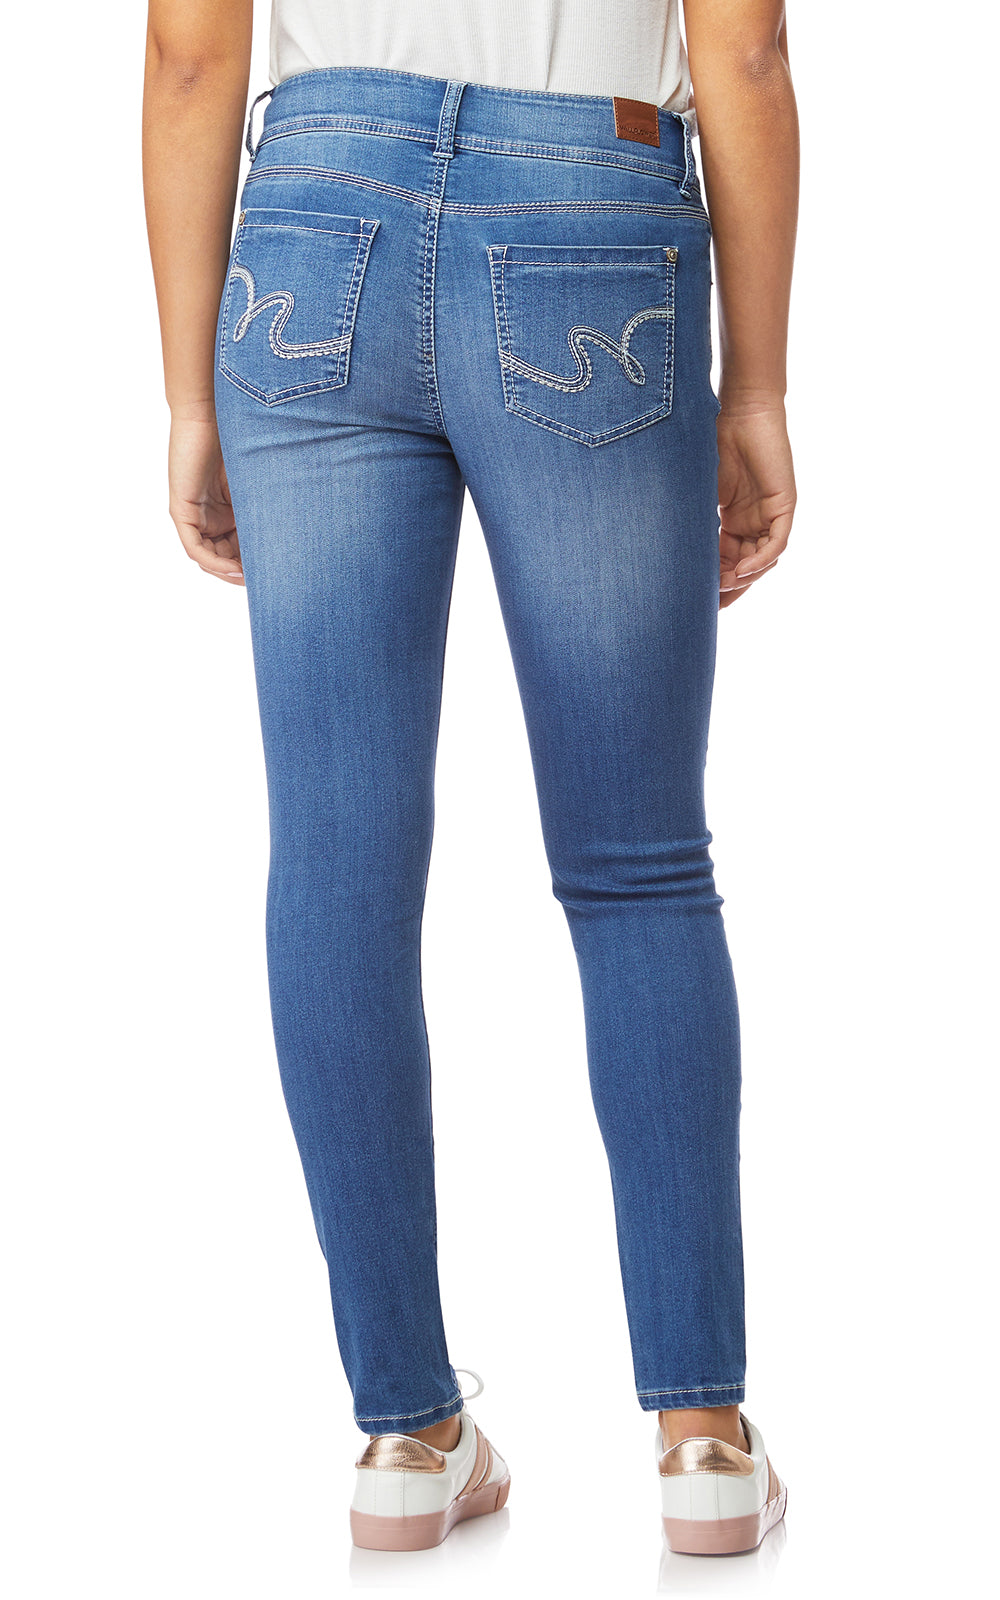 AG's The Legging Jeans - Our Review of These AG's